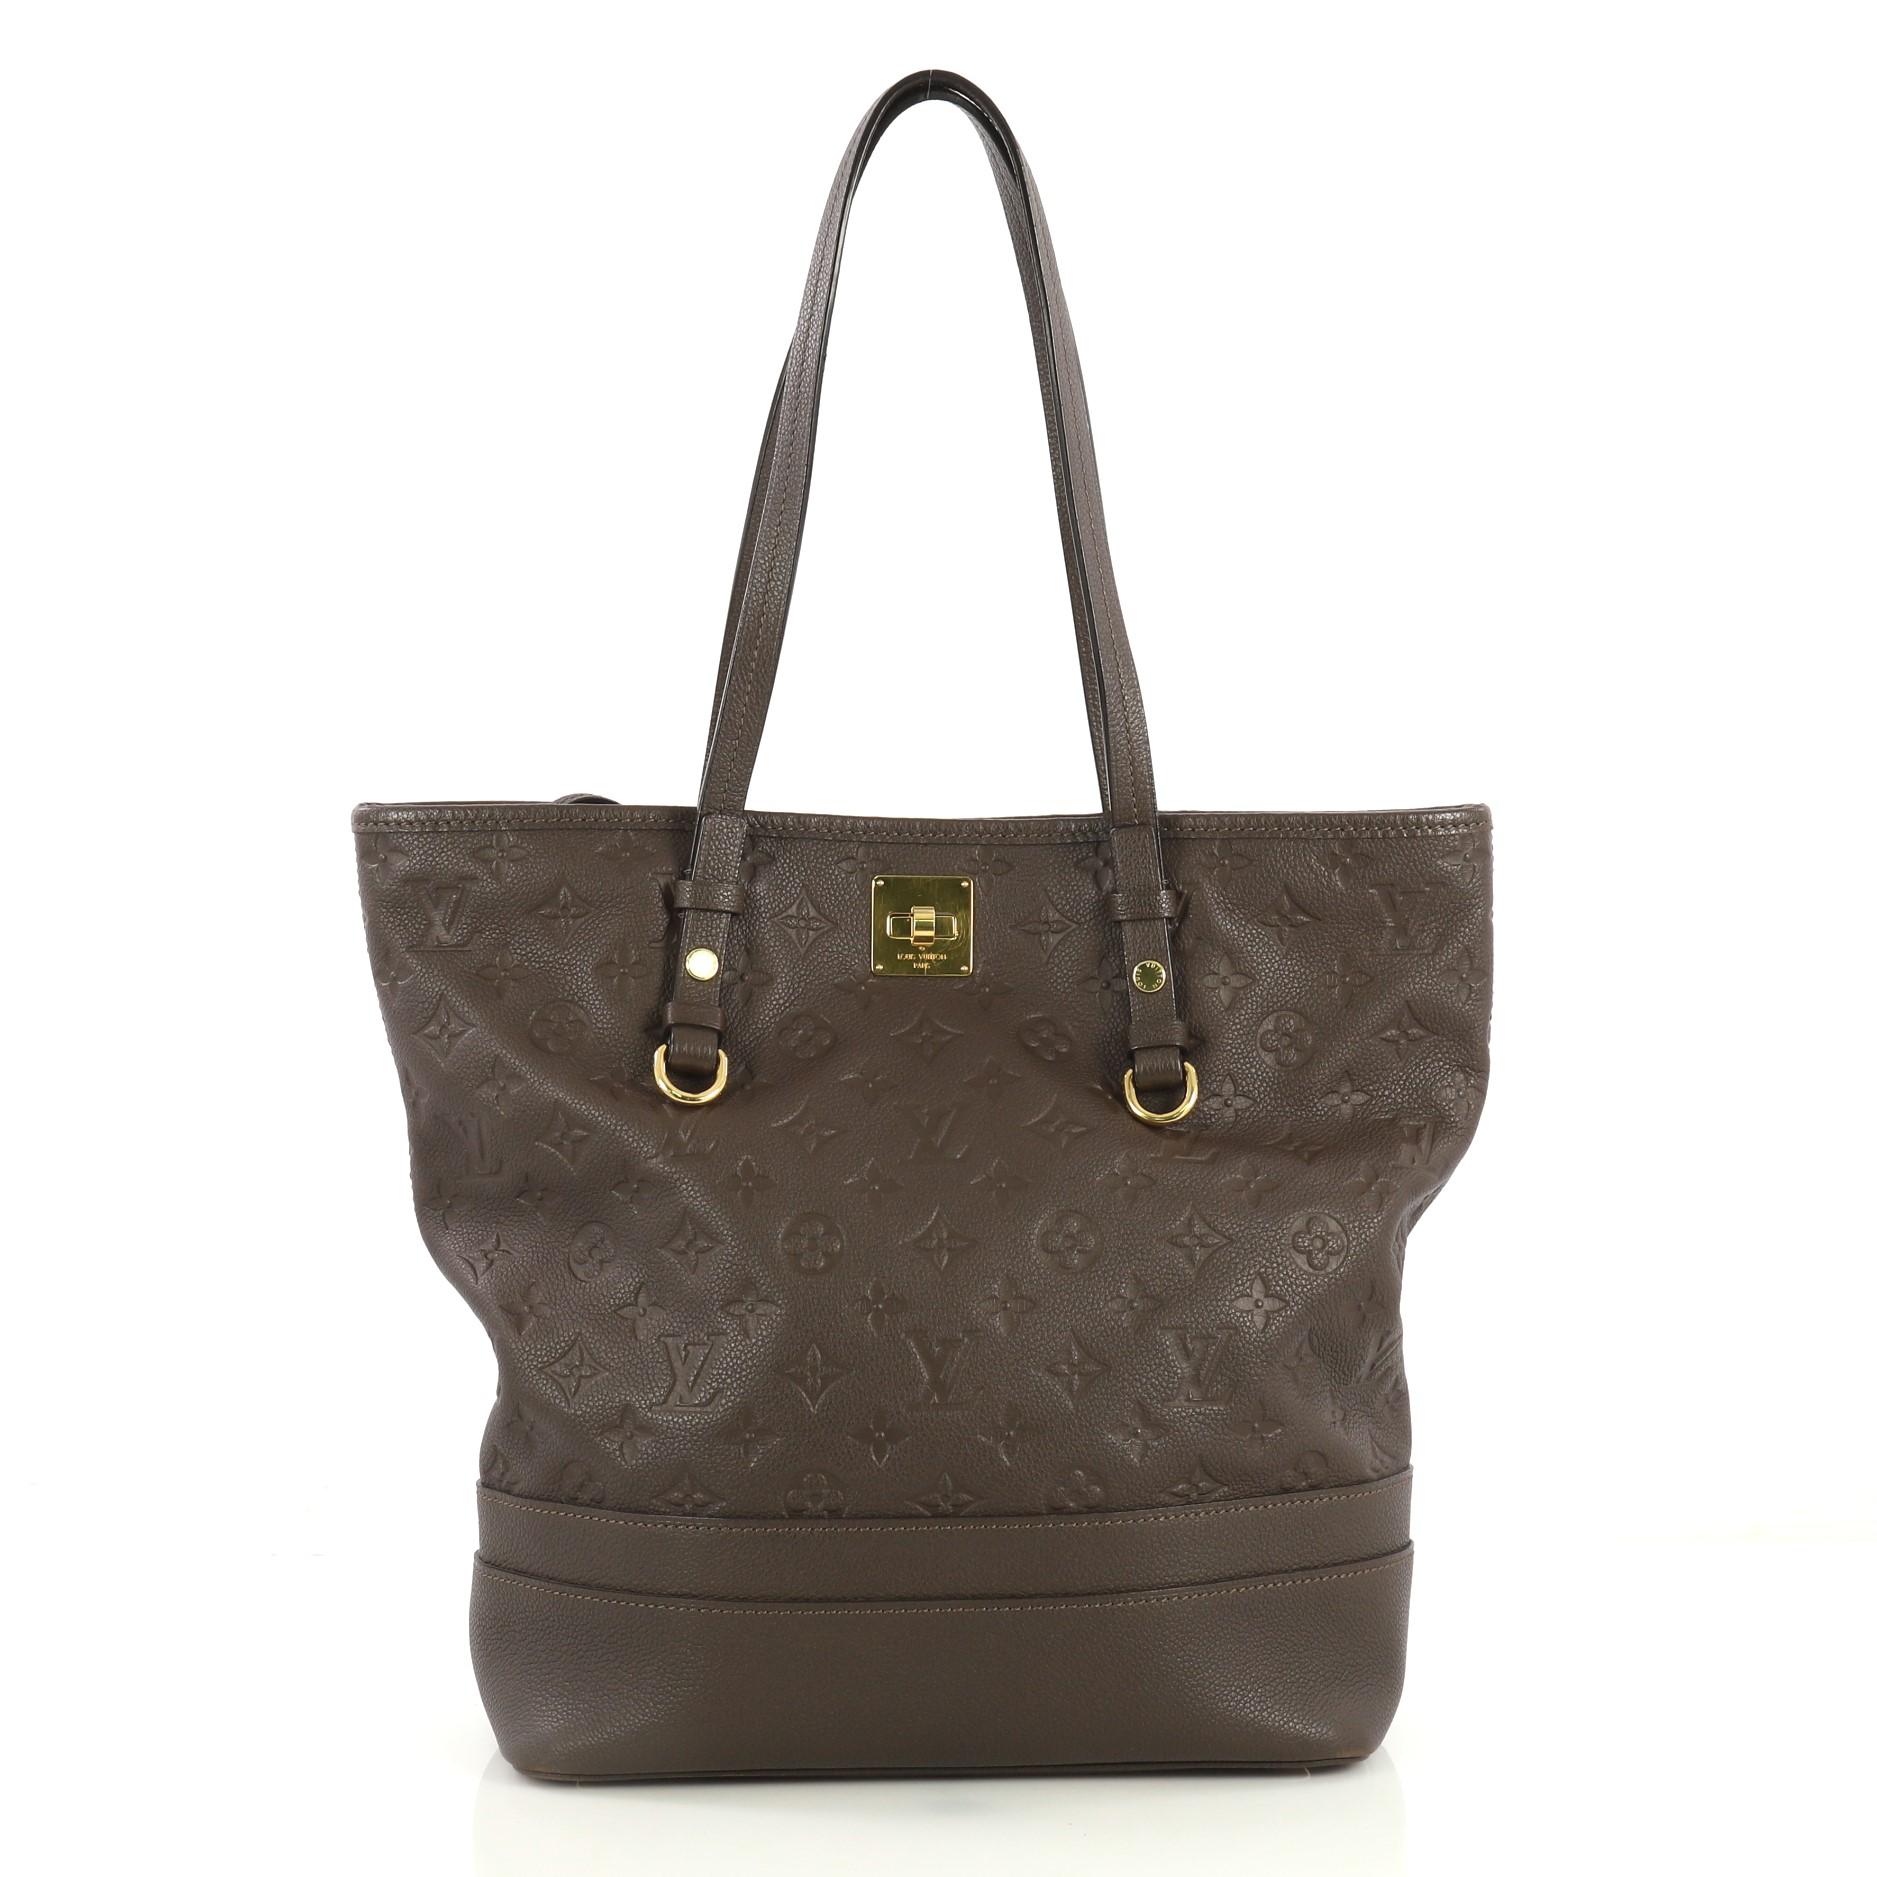 This Louis Vuitton Citadine Handbag Monogram Empreinte Leather PM, crafted in brown monogram empreinte leather, features dual slim handles, protective base studs, and gold-tone hardware. Its turn-lock closure opens to a brown fabric interior with